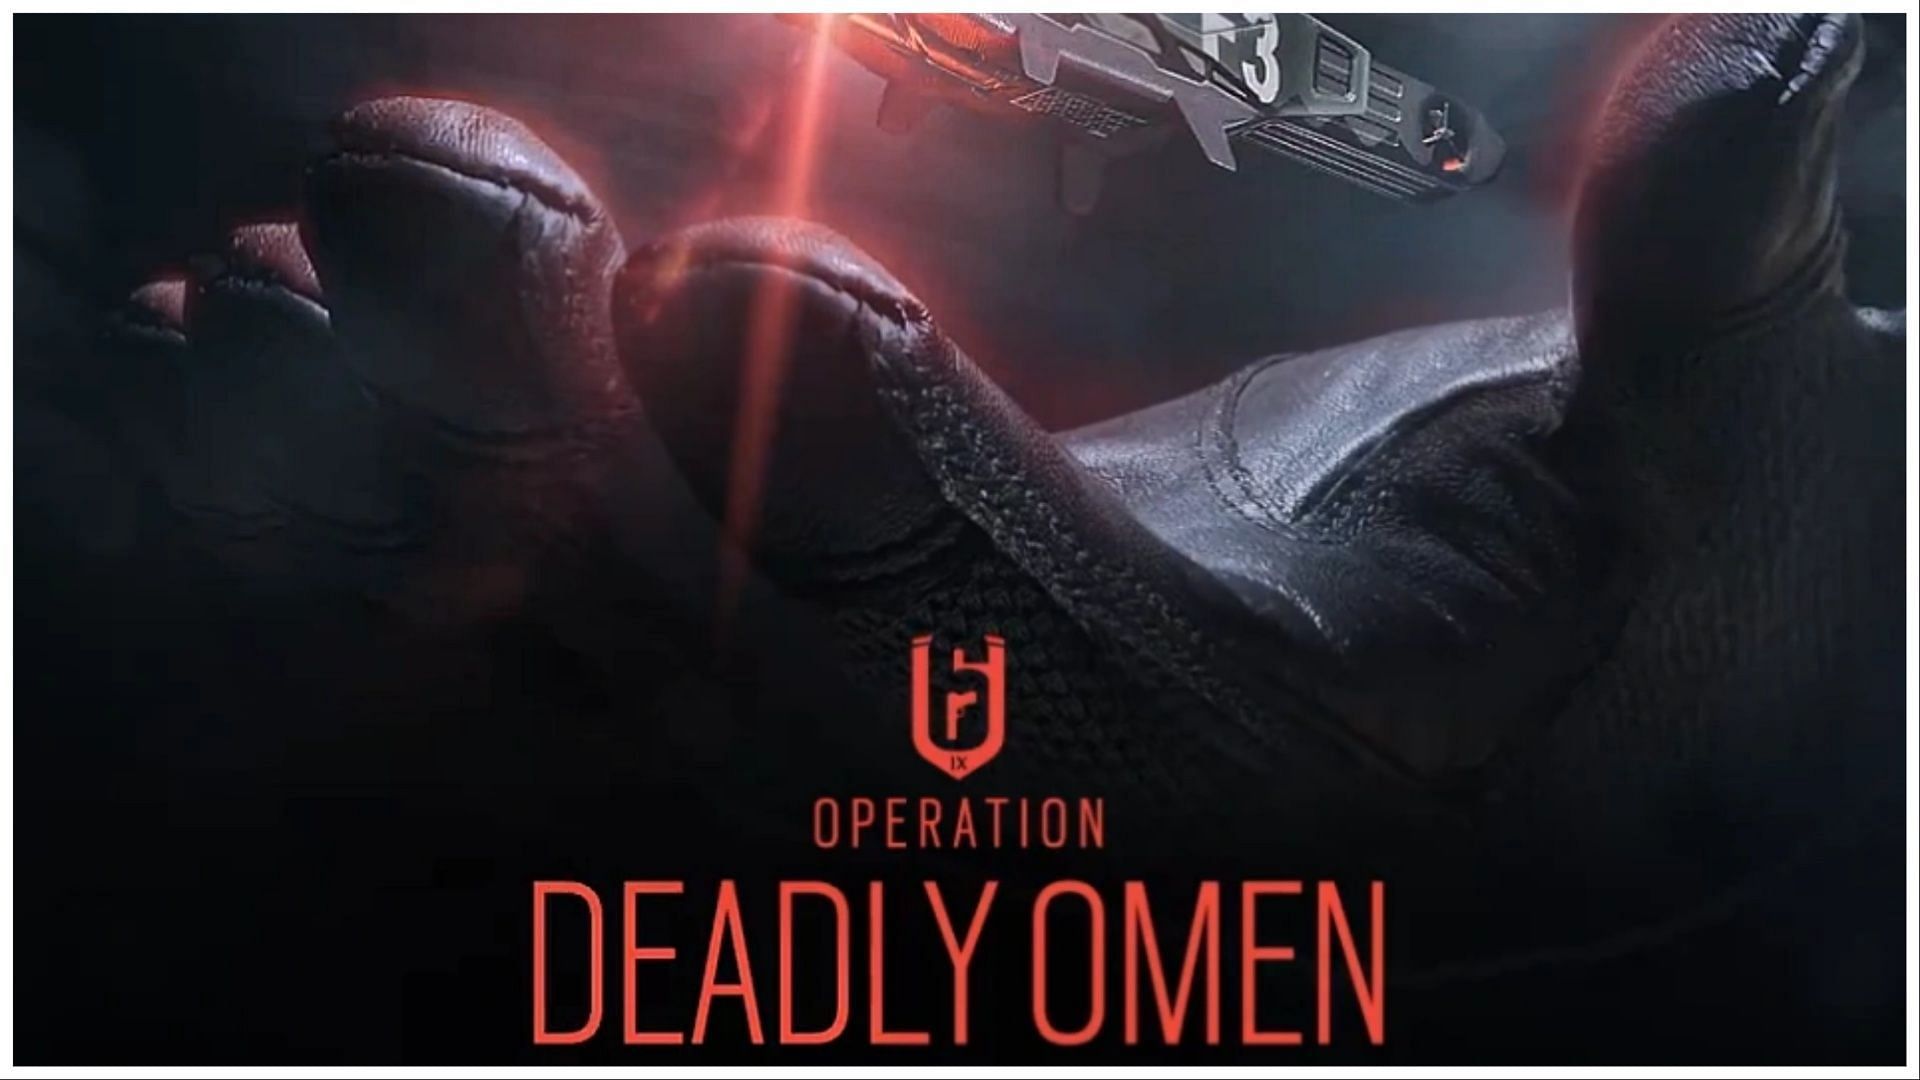 Rainbow Six Siege recently launched Operation Deadly Omen (Image via Ubisoft)